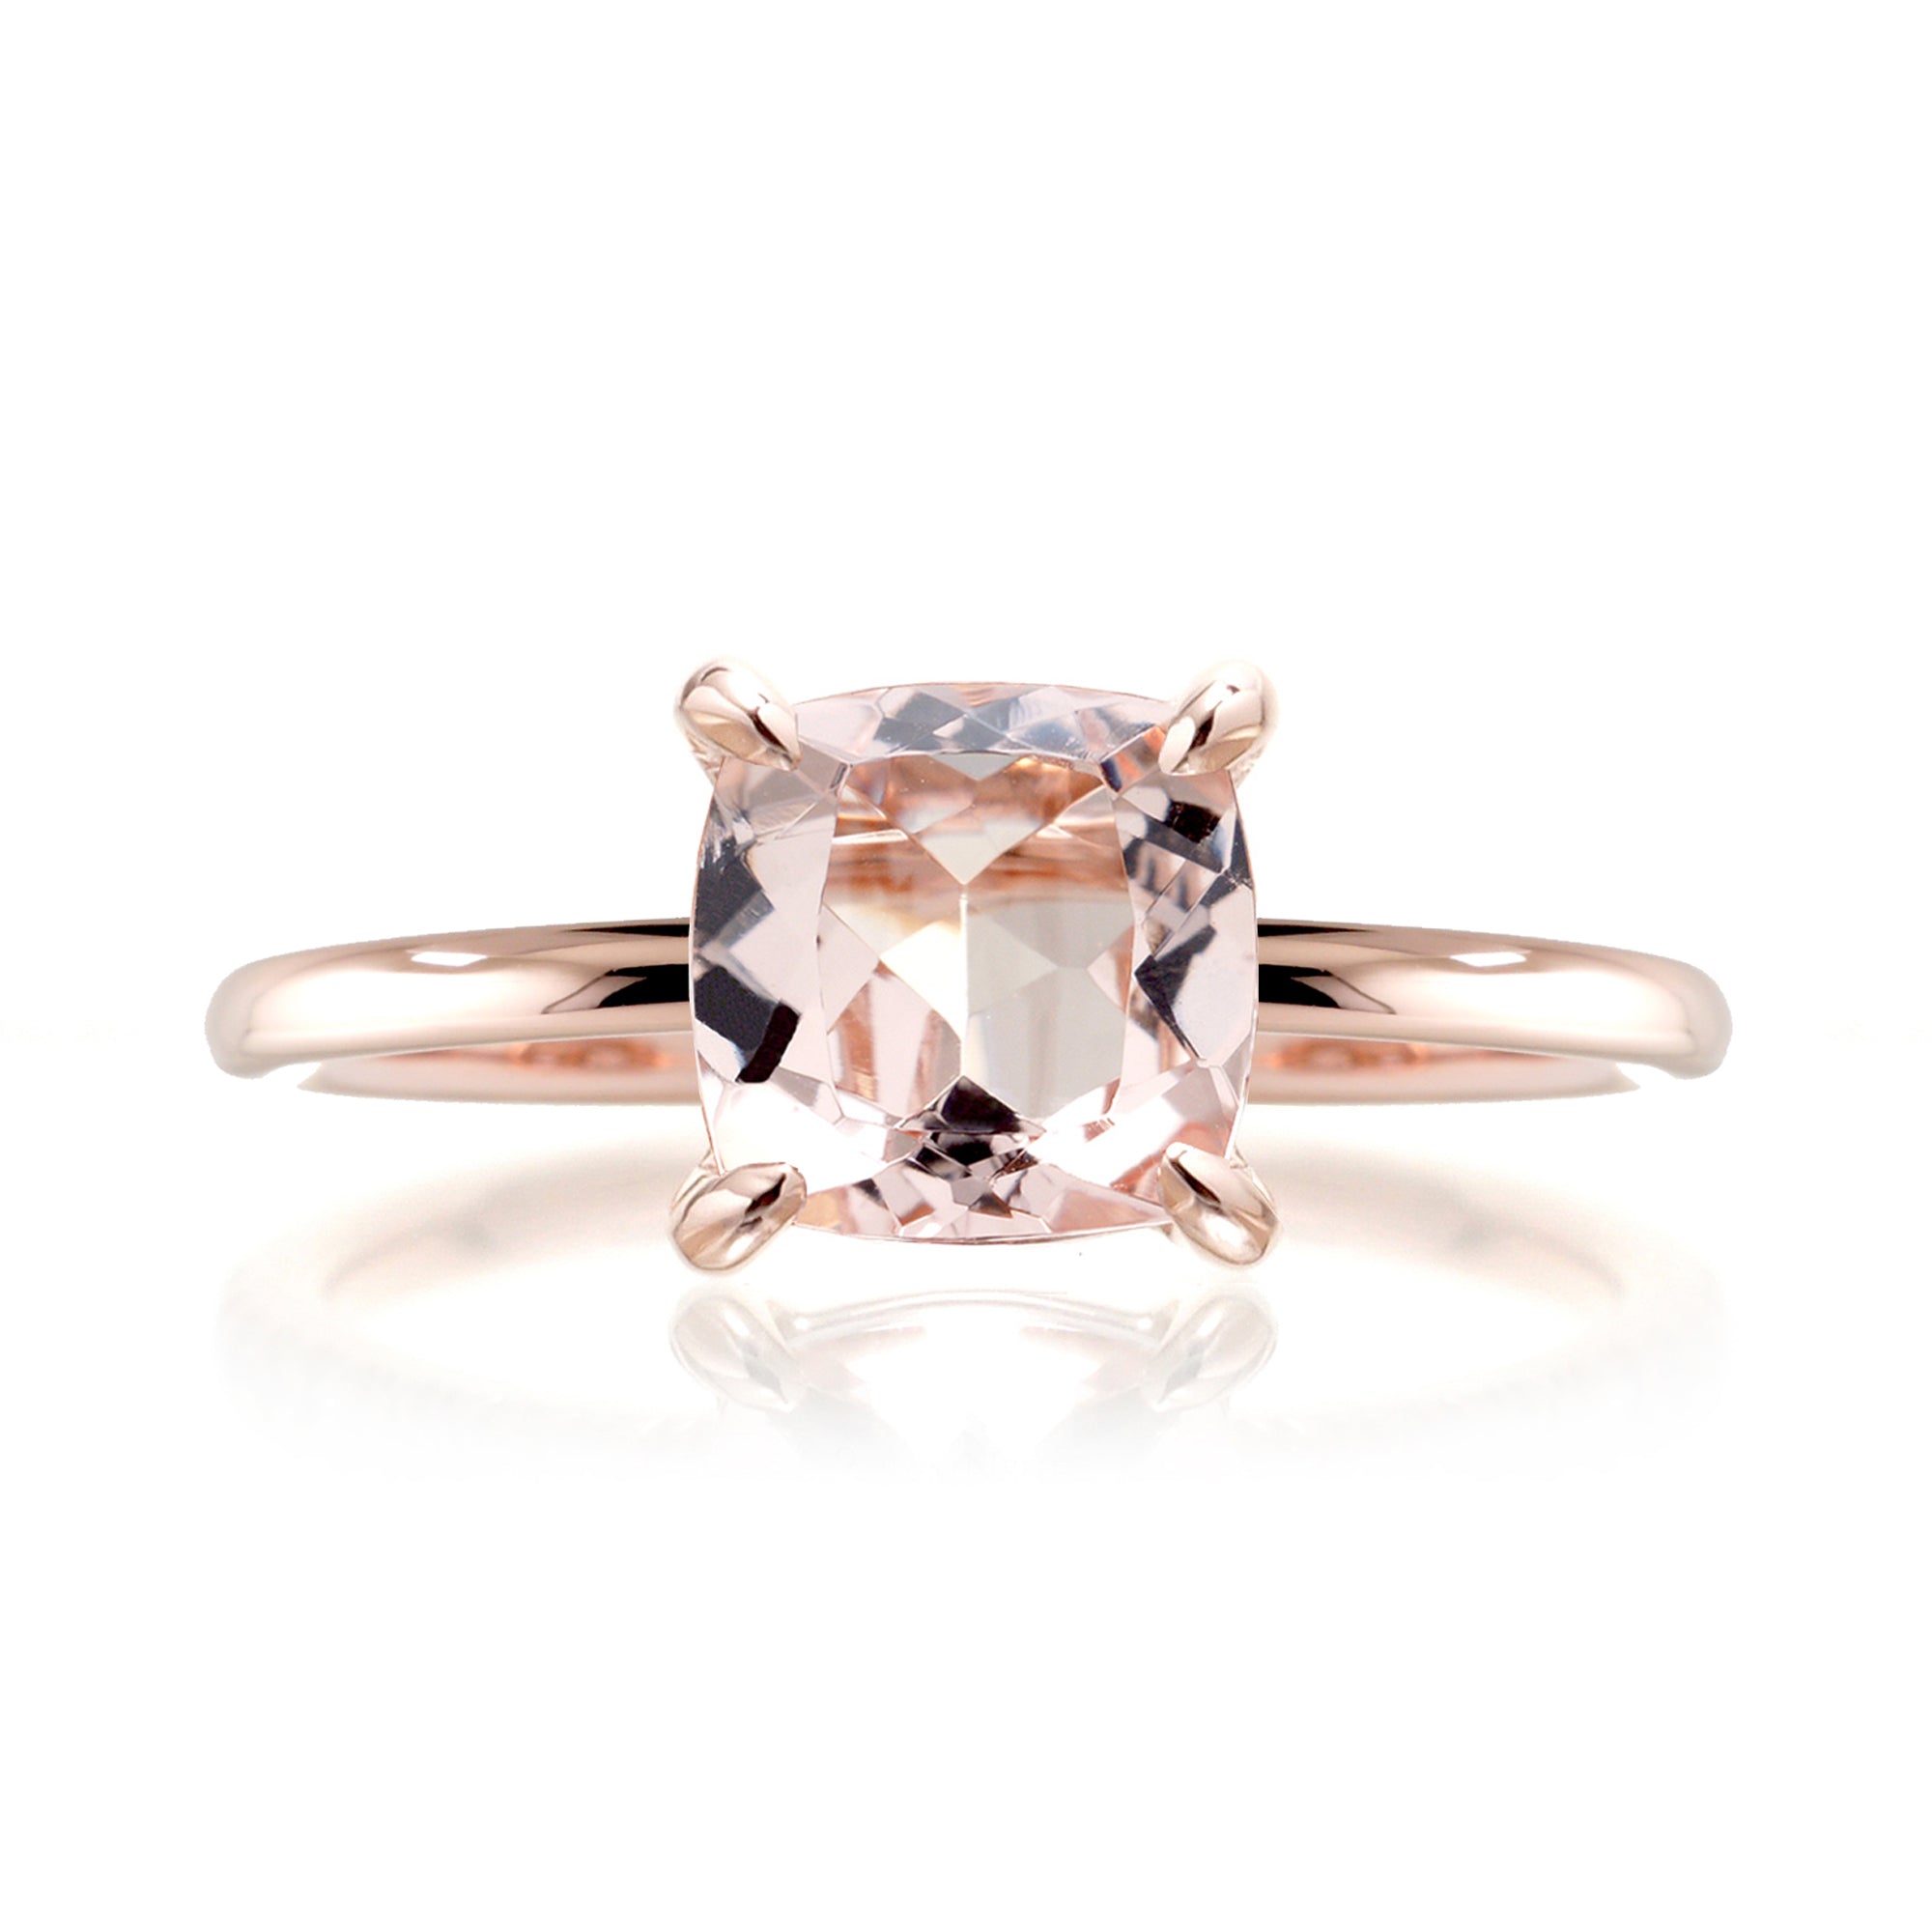 Square cushion morganite solid band ring in rose gold - The Ava